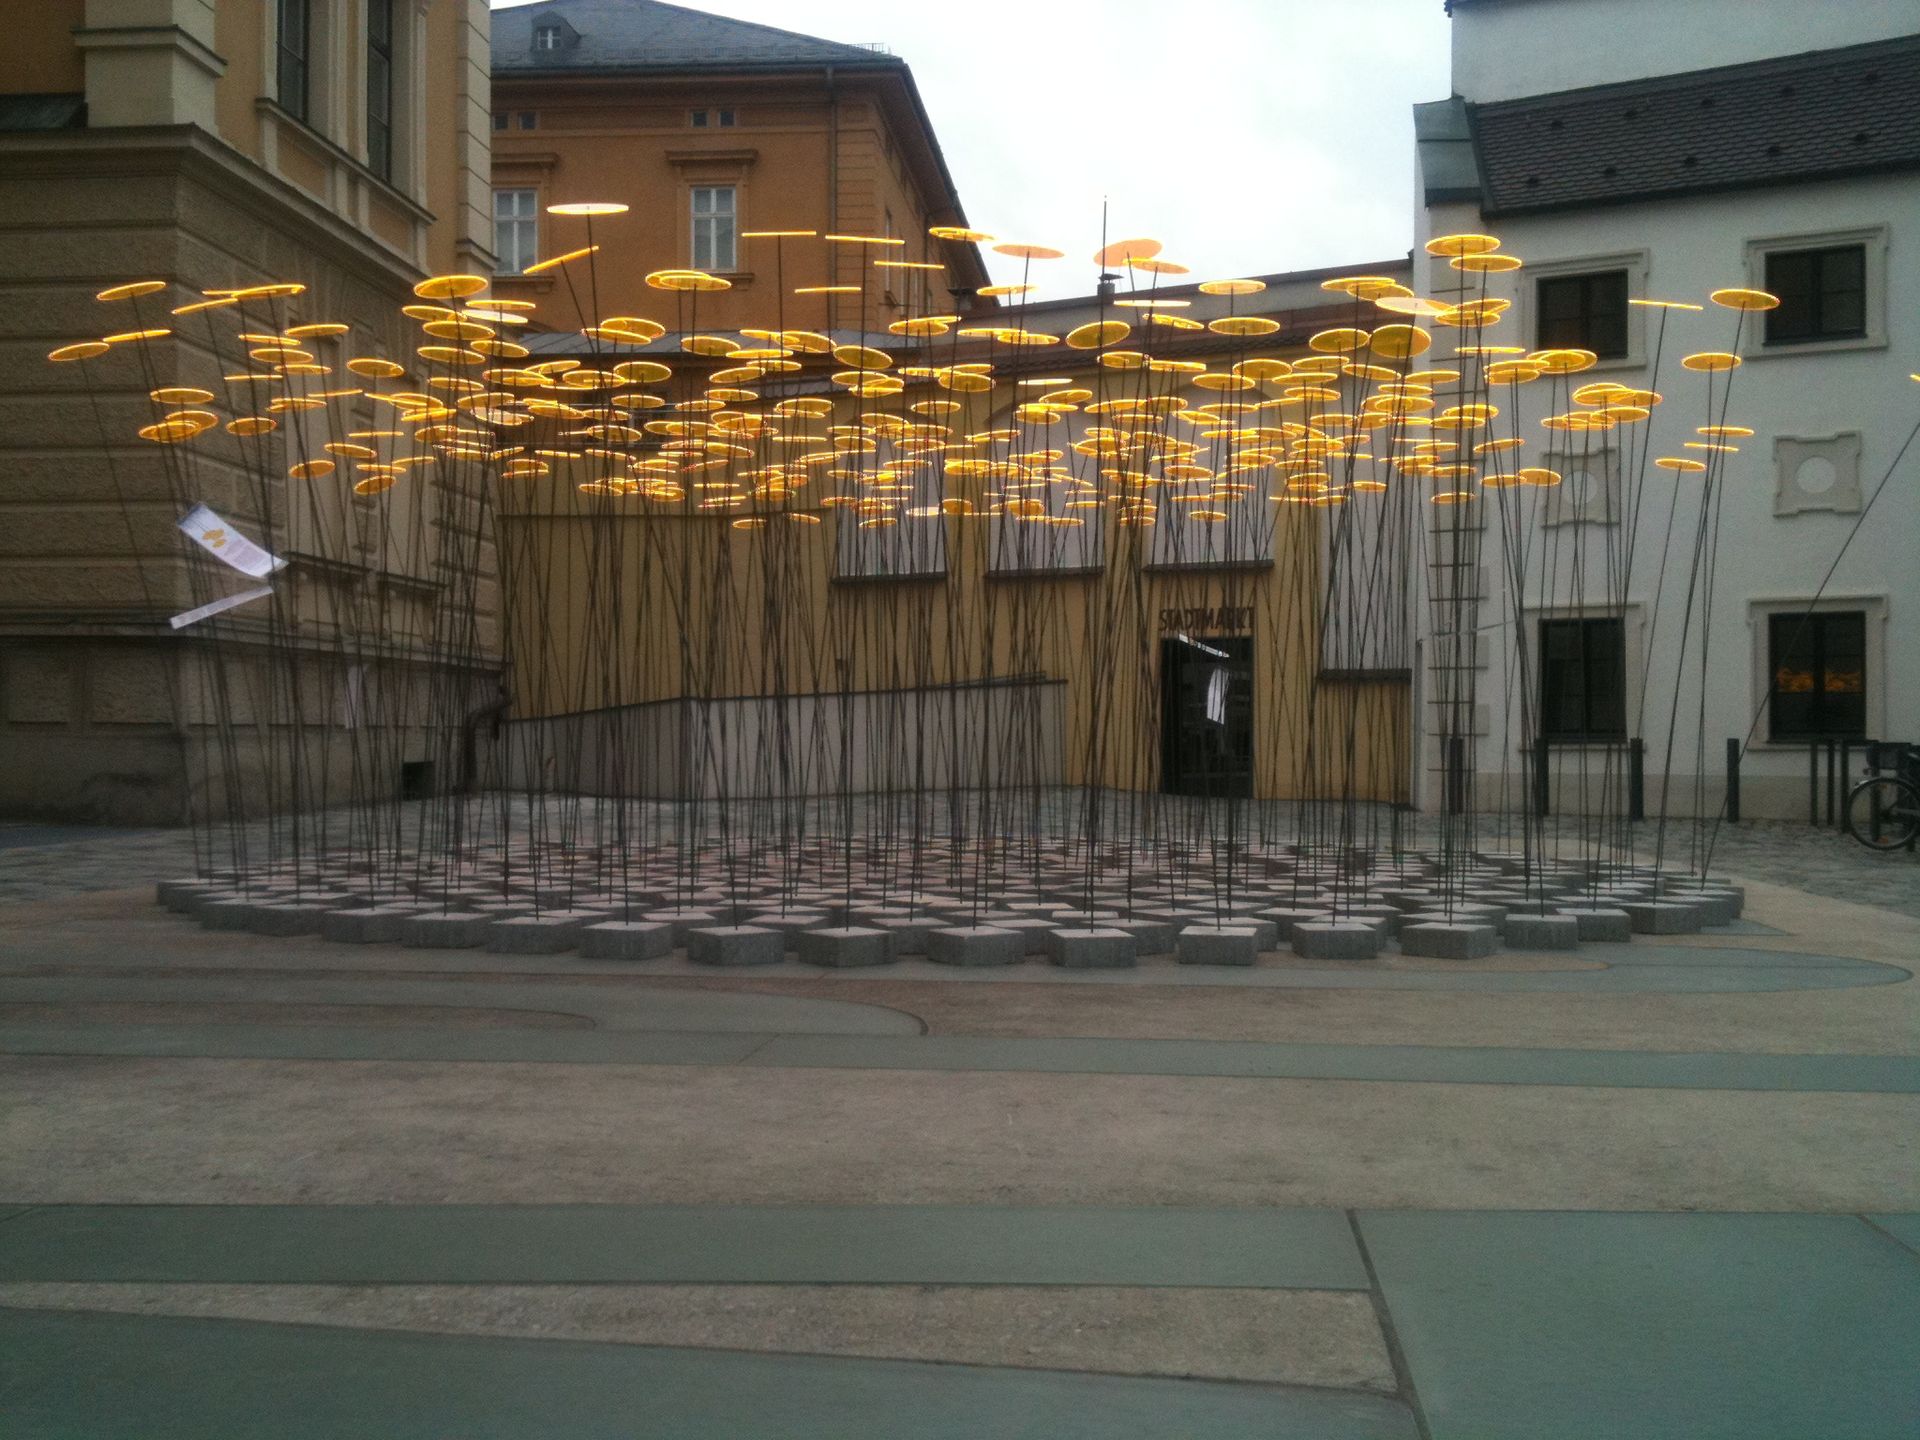 large sun lights with yellow colors